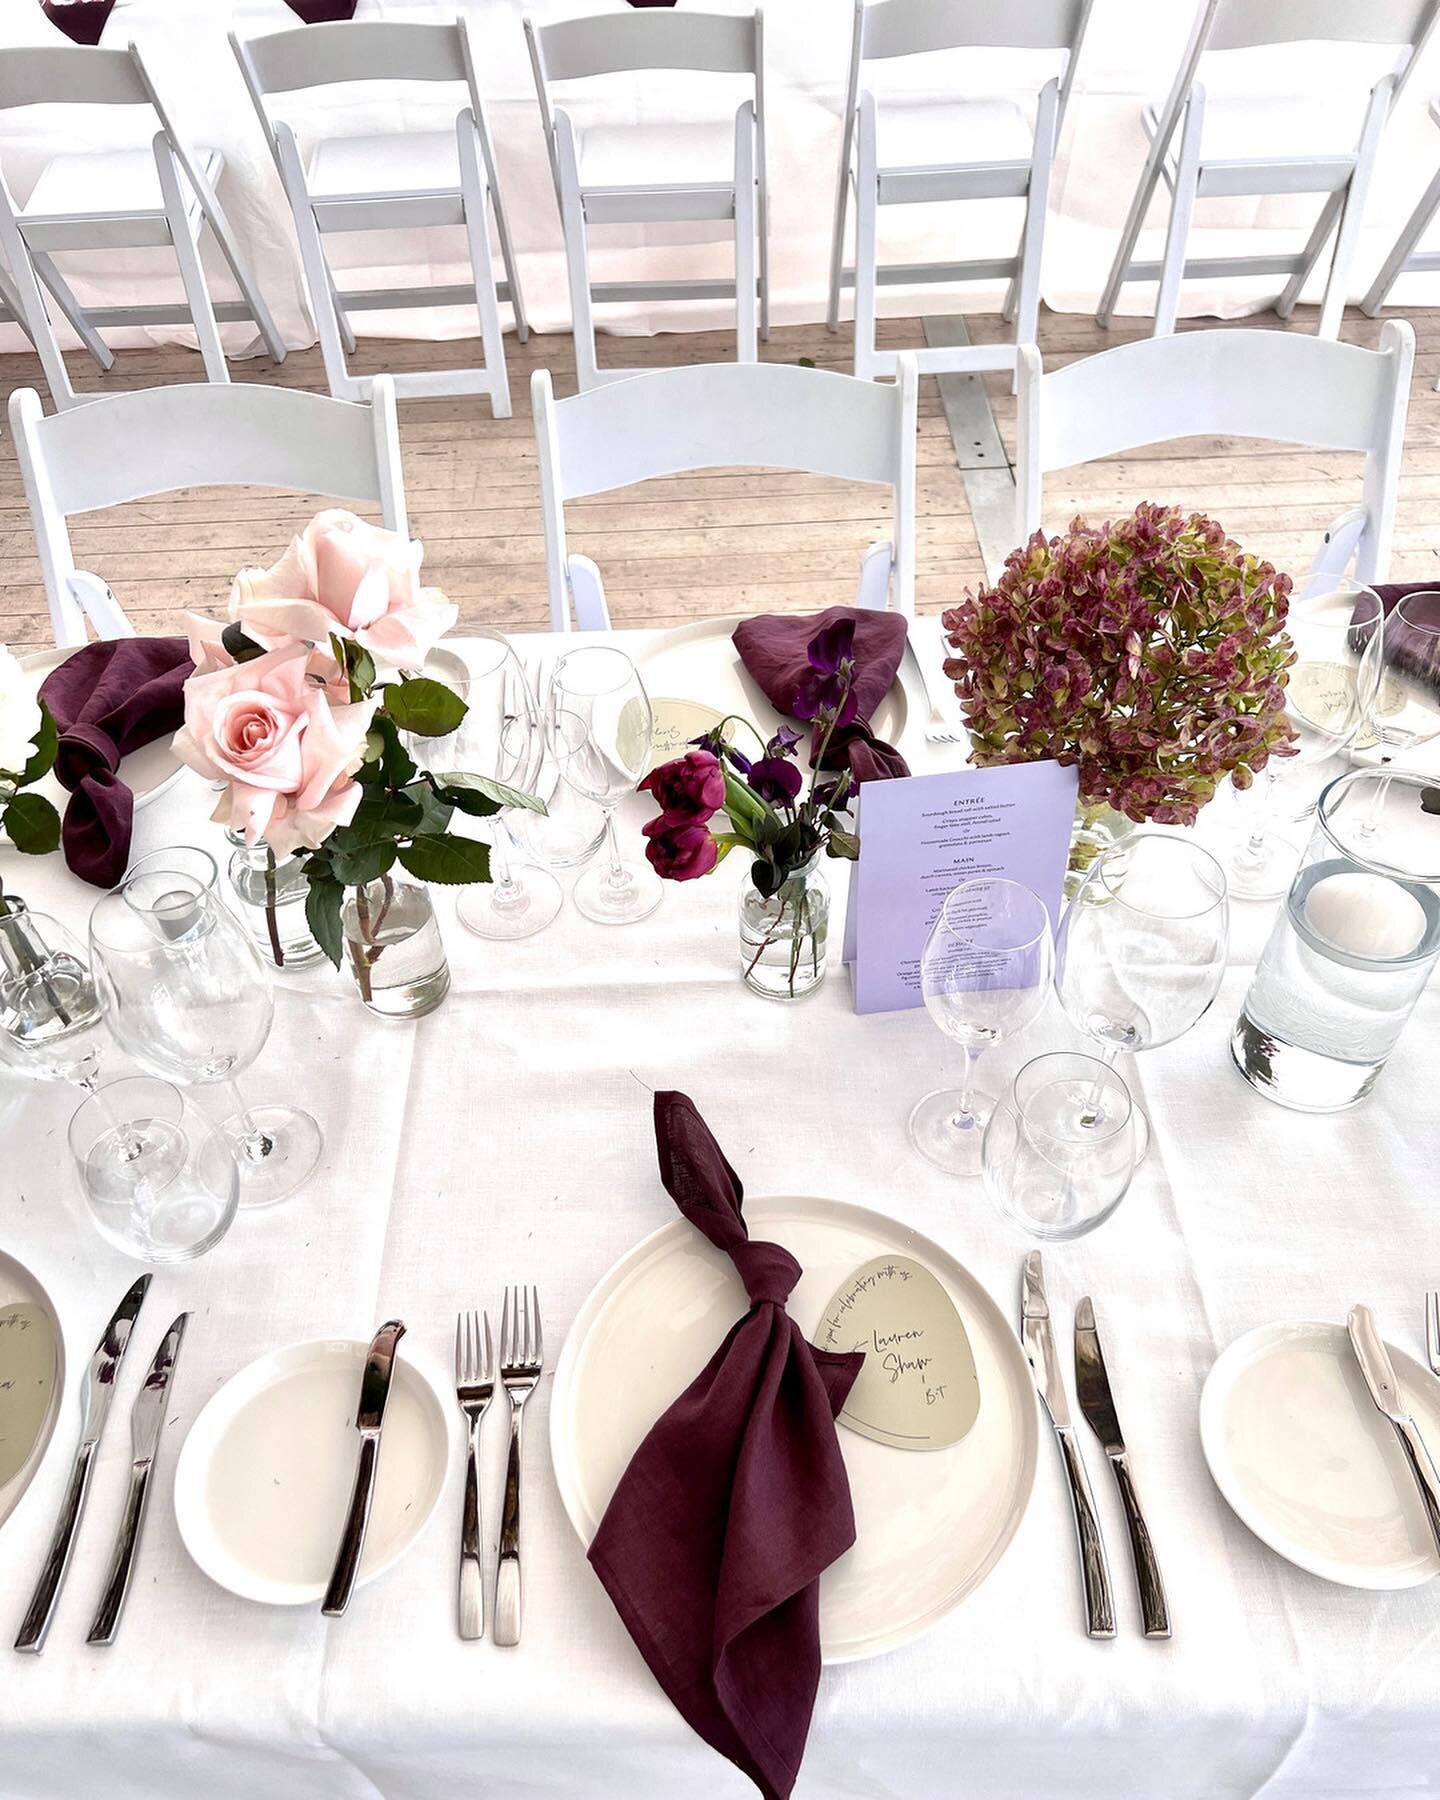 Scattered bud vases paired with the most perfect mulberry napkins for Belle &amp; Tom @growwild.weddings